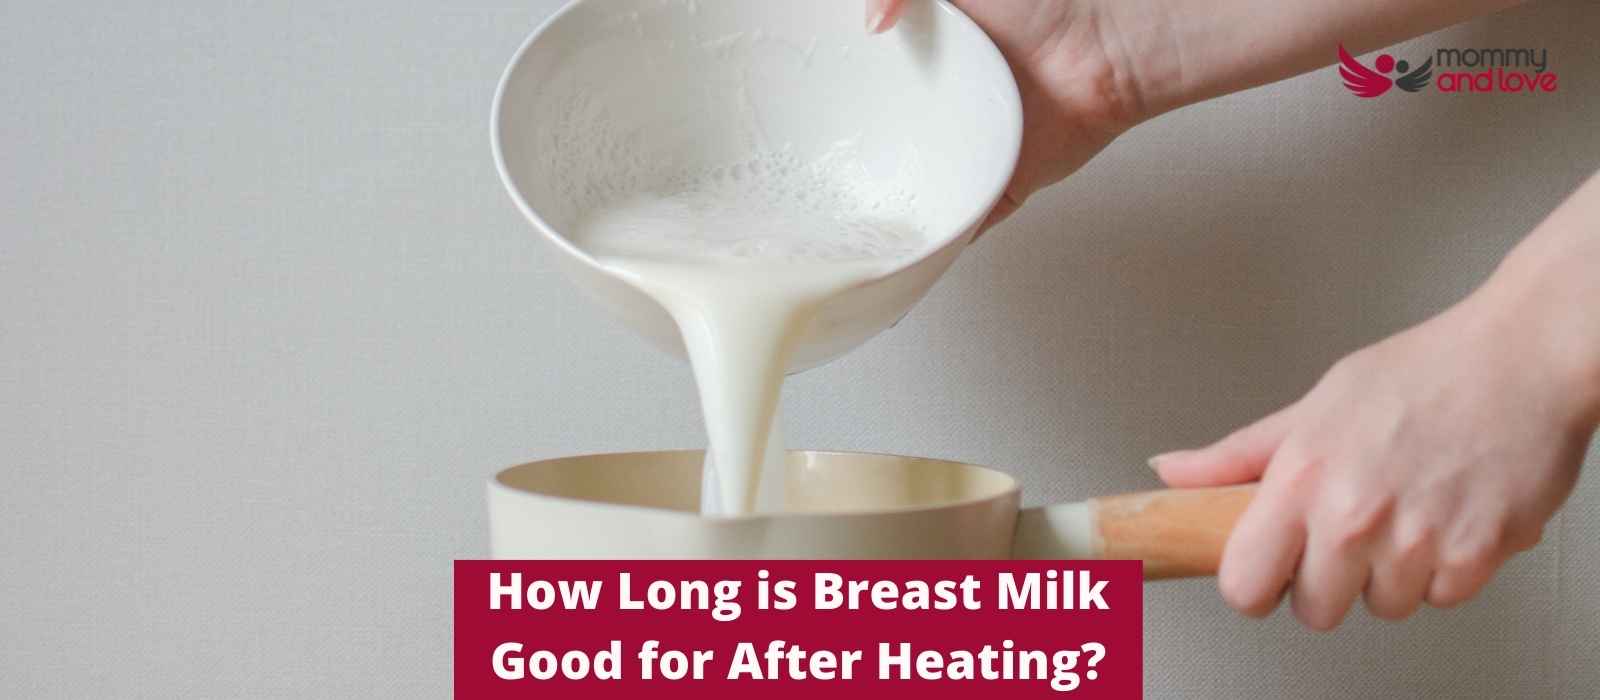 How Long is Breast Milk Good for After Heating?